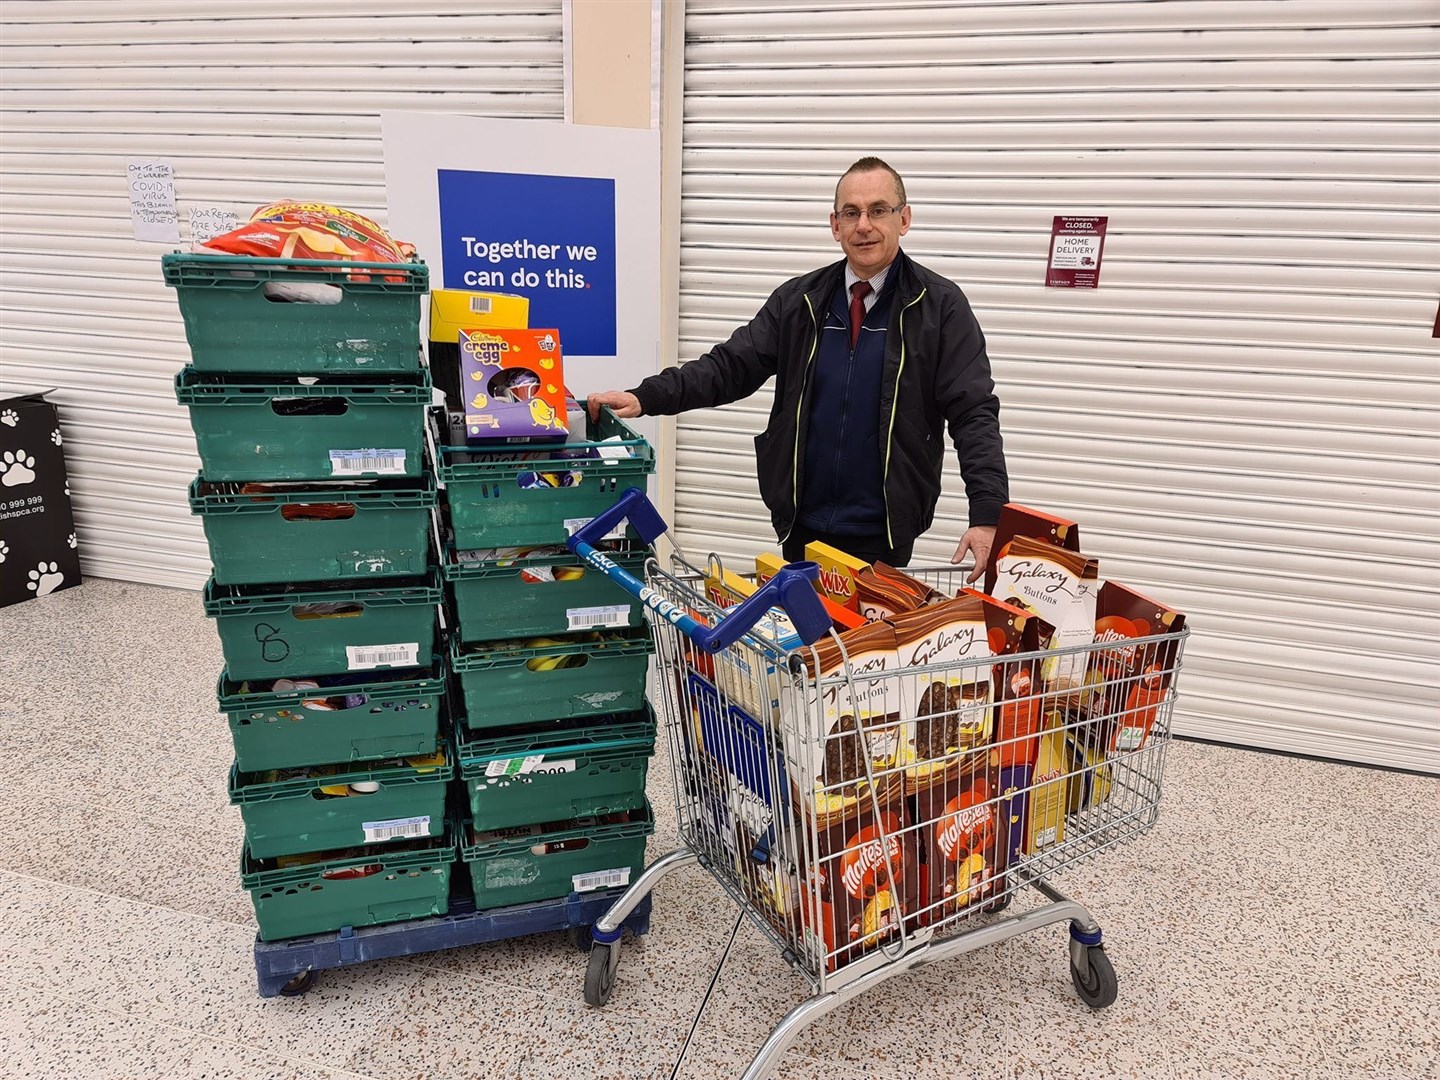 Paul Queen with donations for Raigmore Hospital in Inverness.